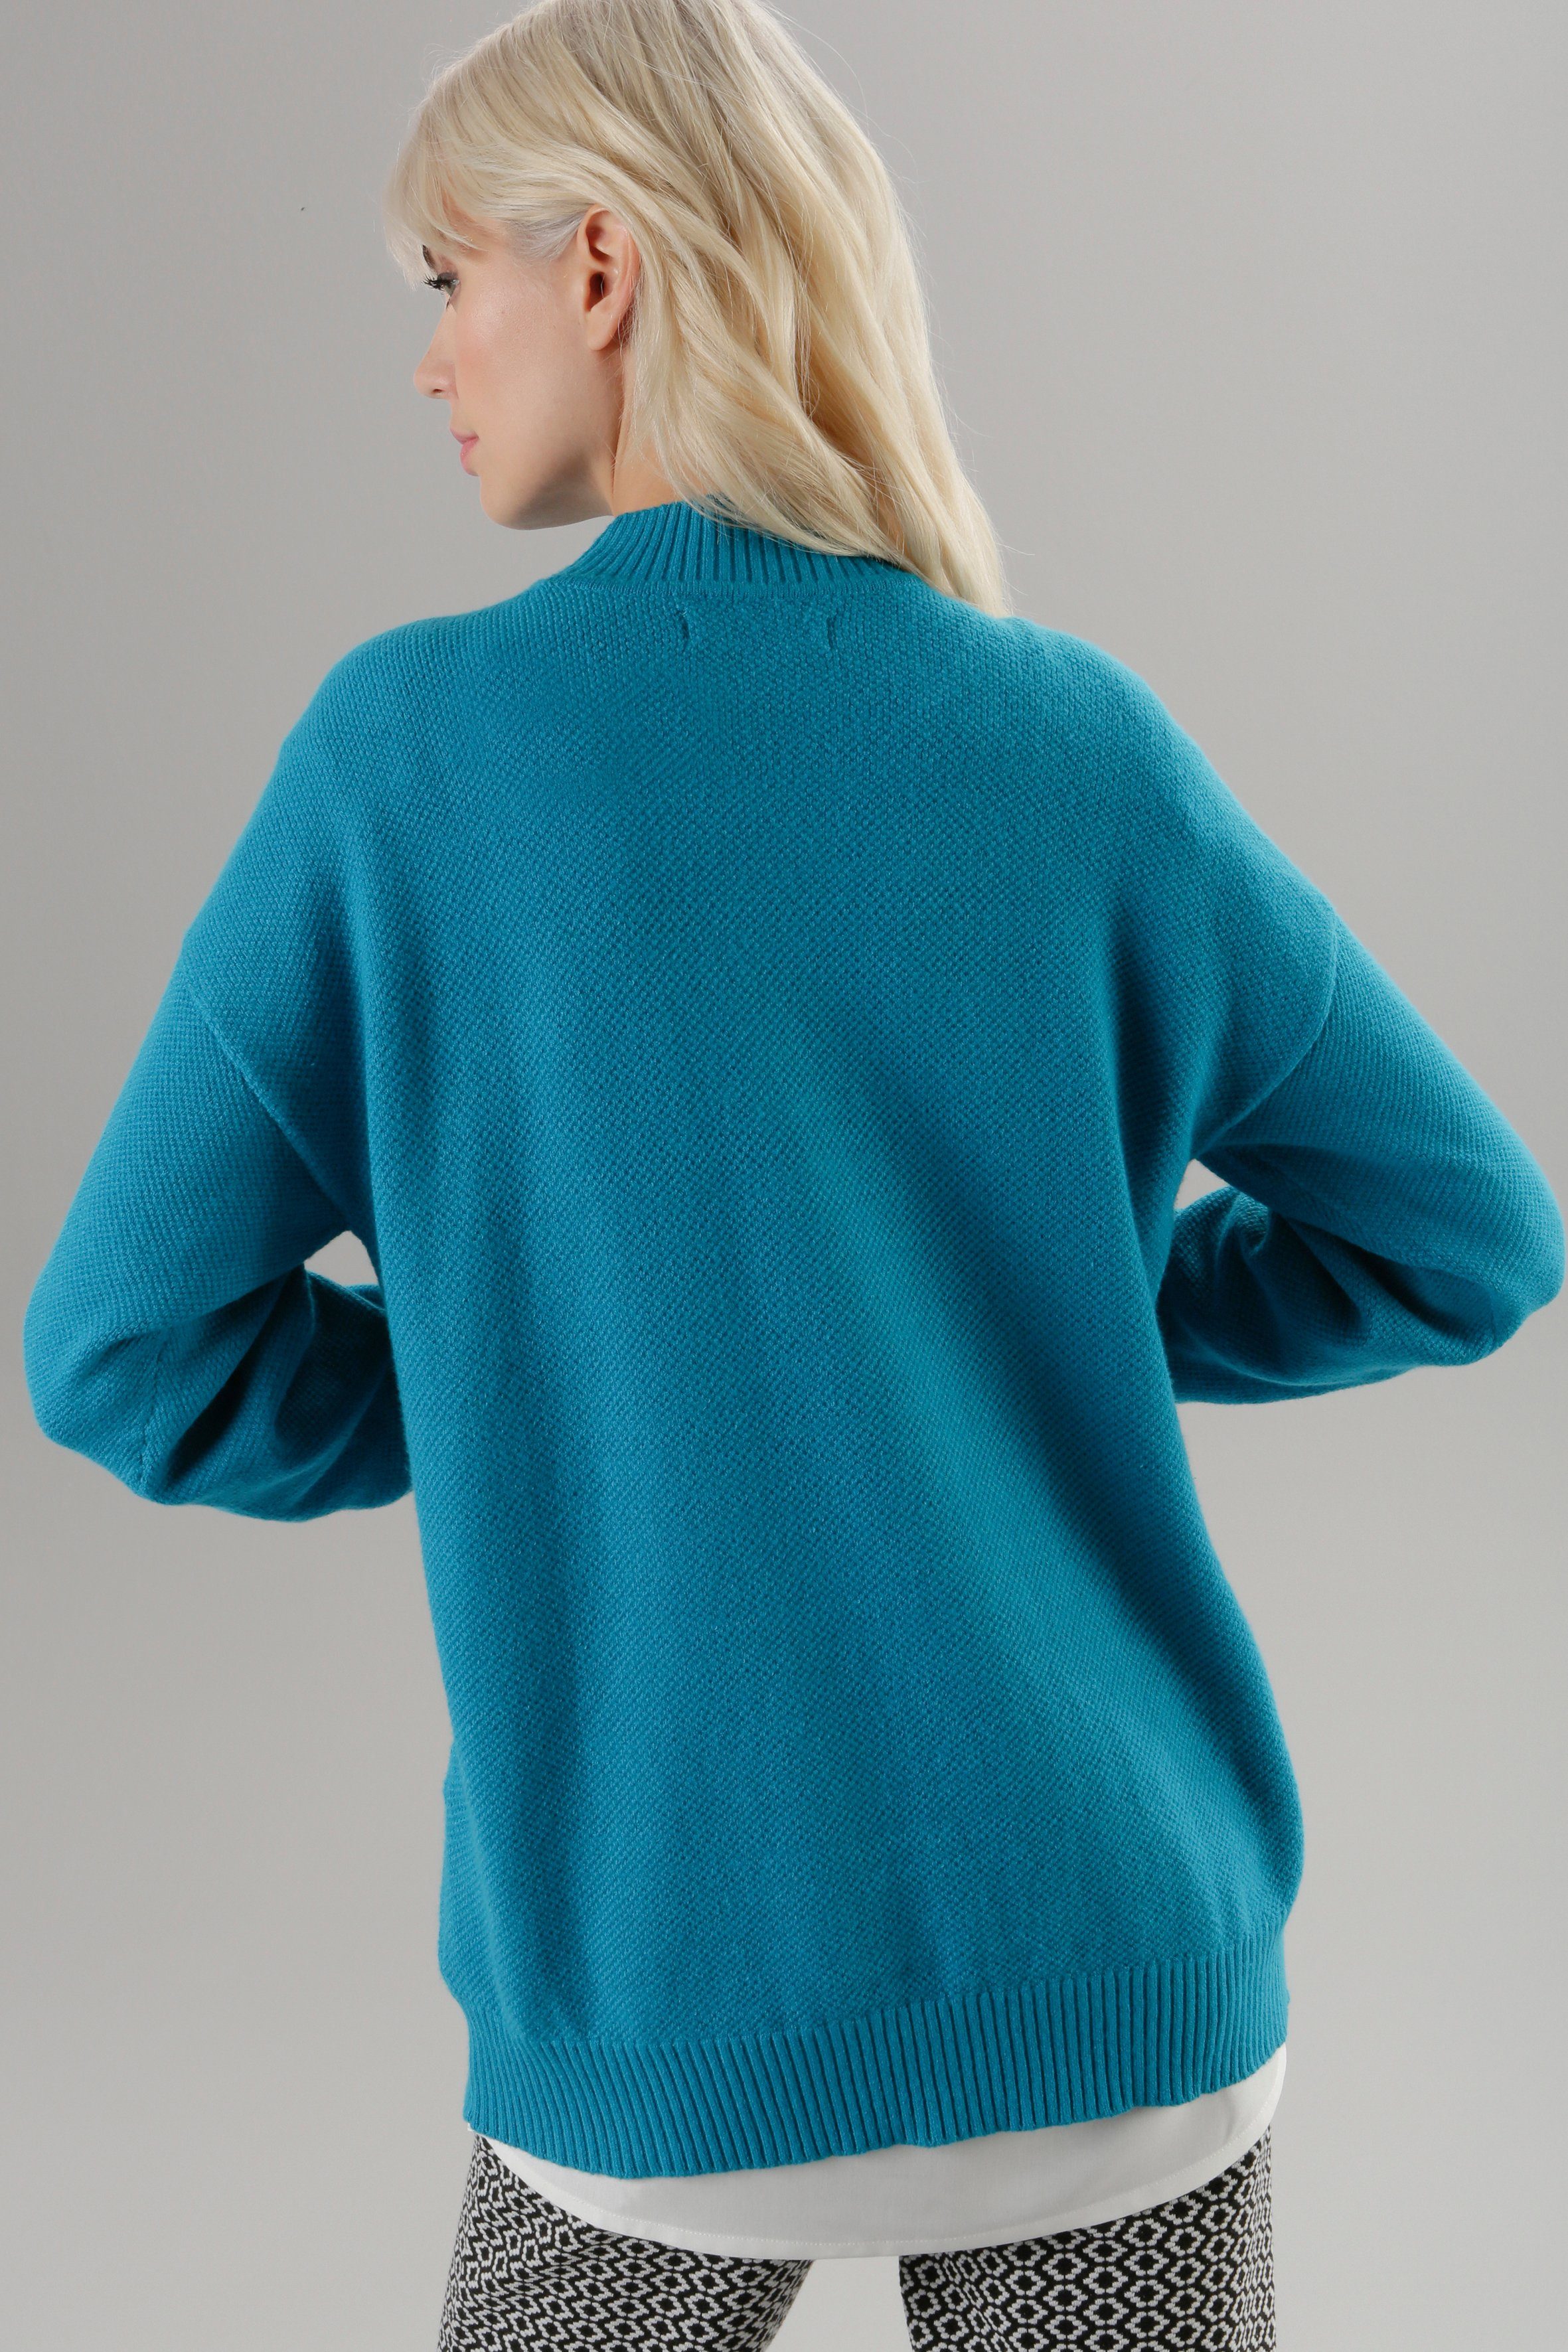 Aniston SELECTED Strickpullover mit petrol Perlfangmuster feinem